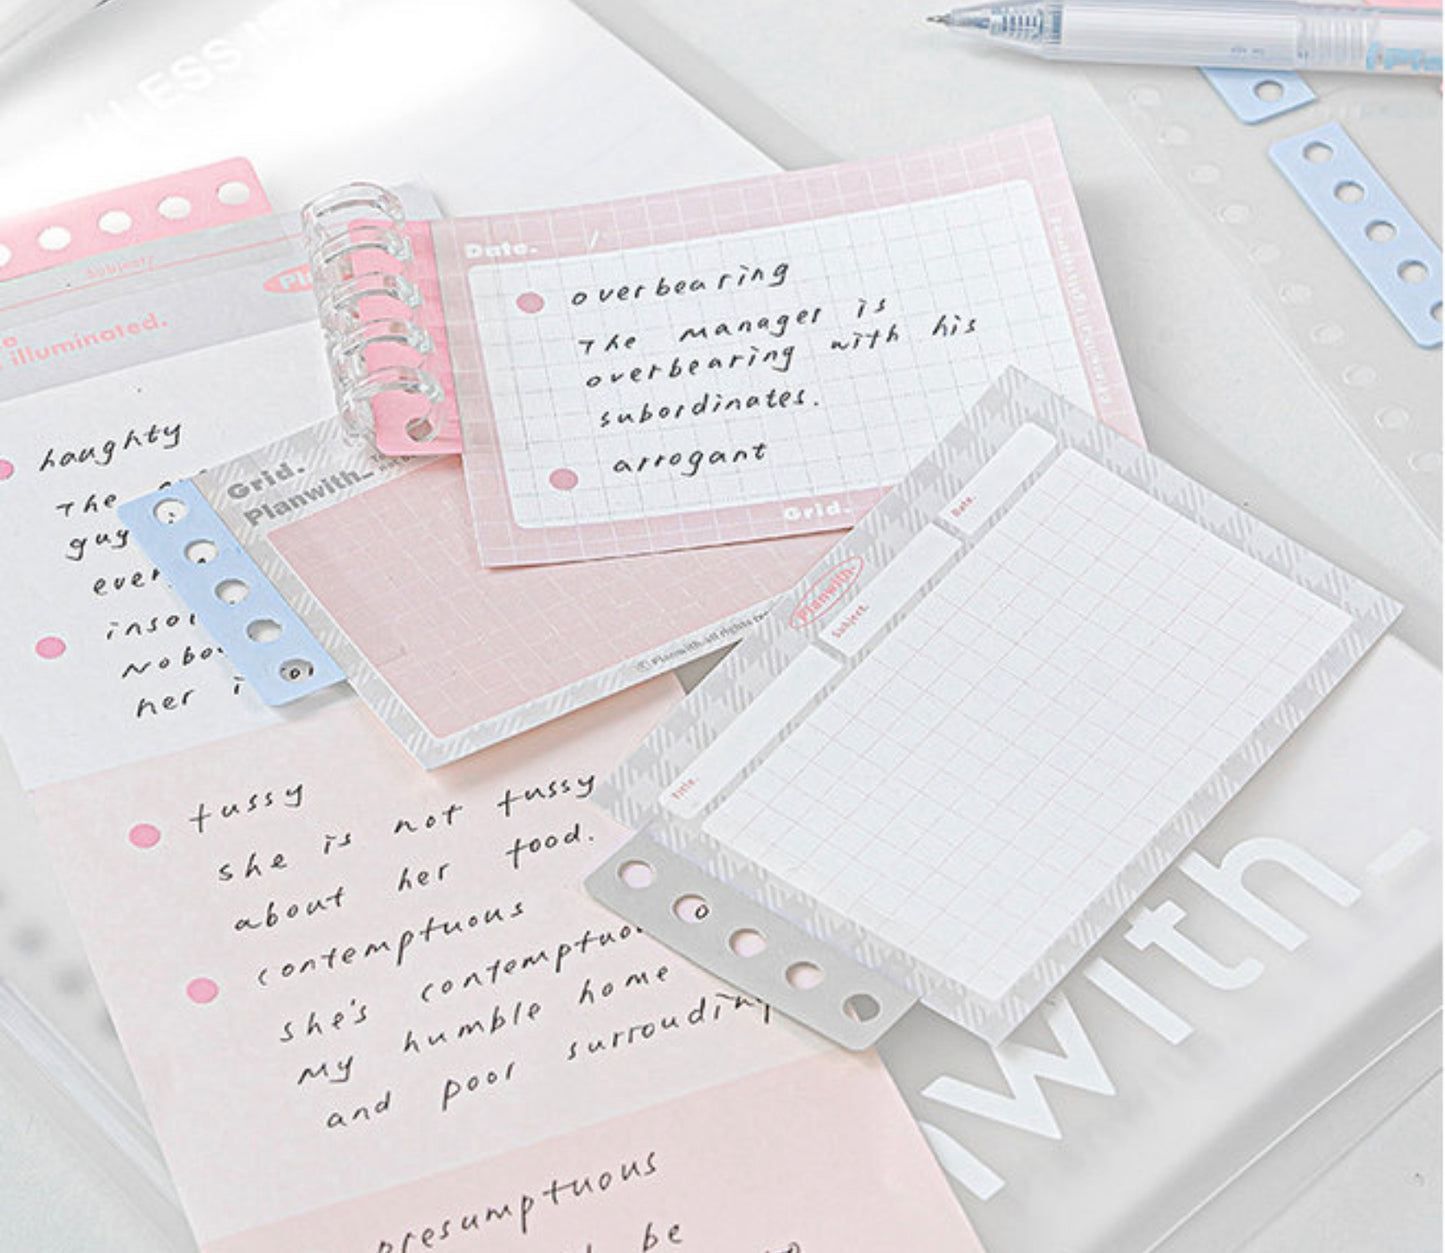 Expand To Stick Binder Hole Punch Stickers